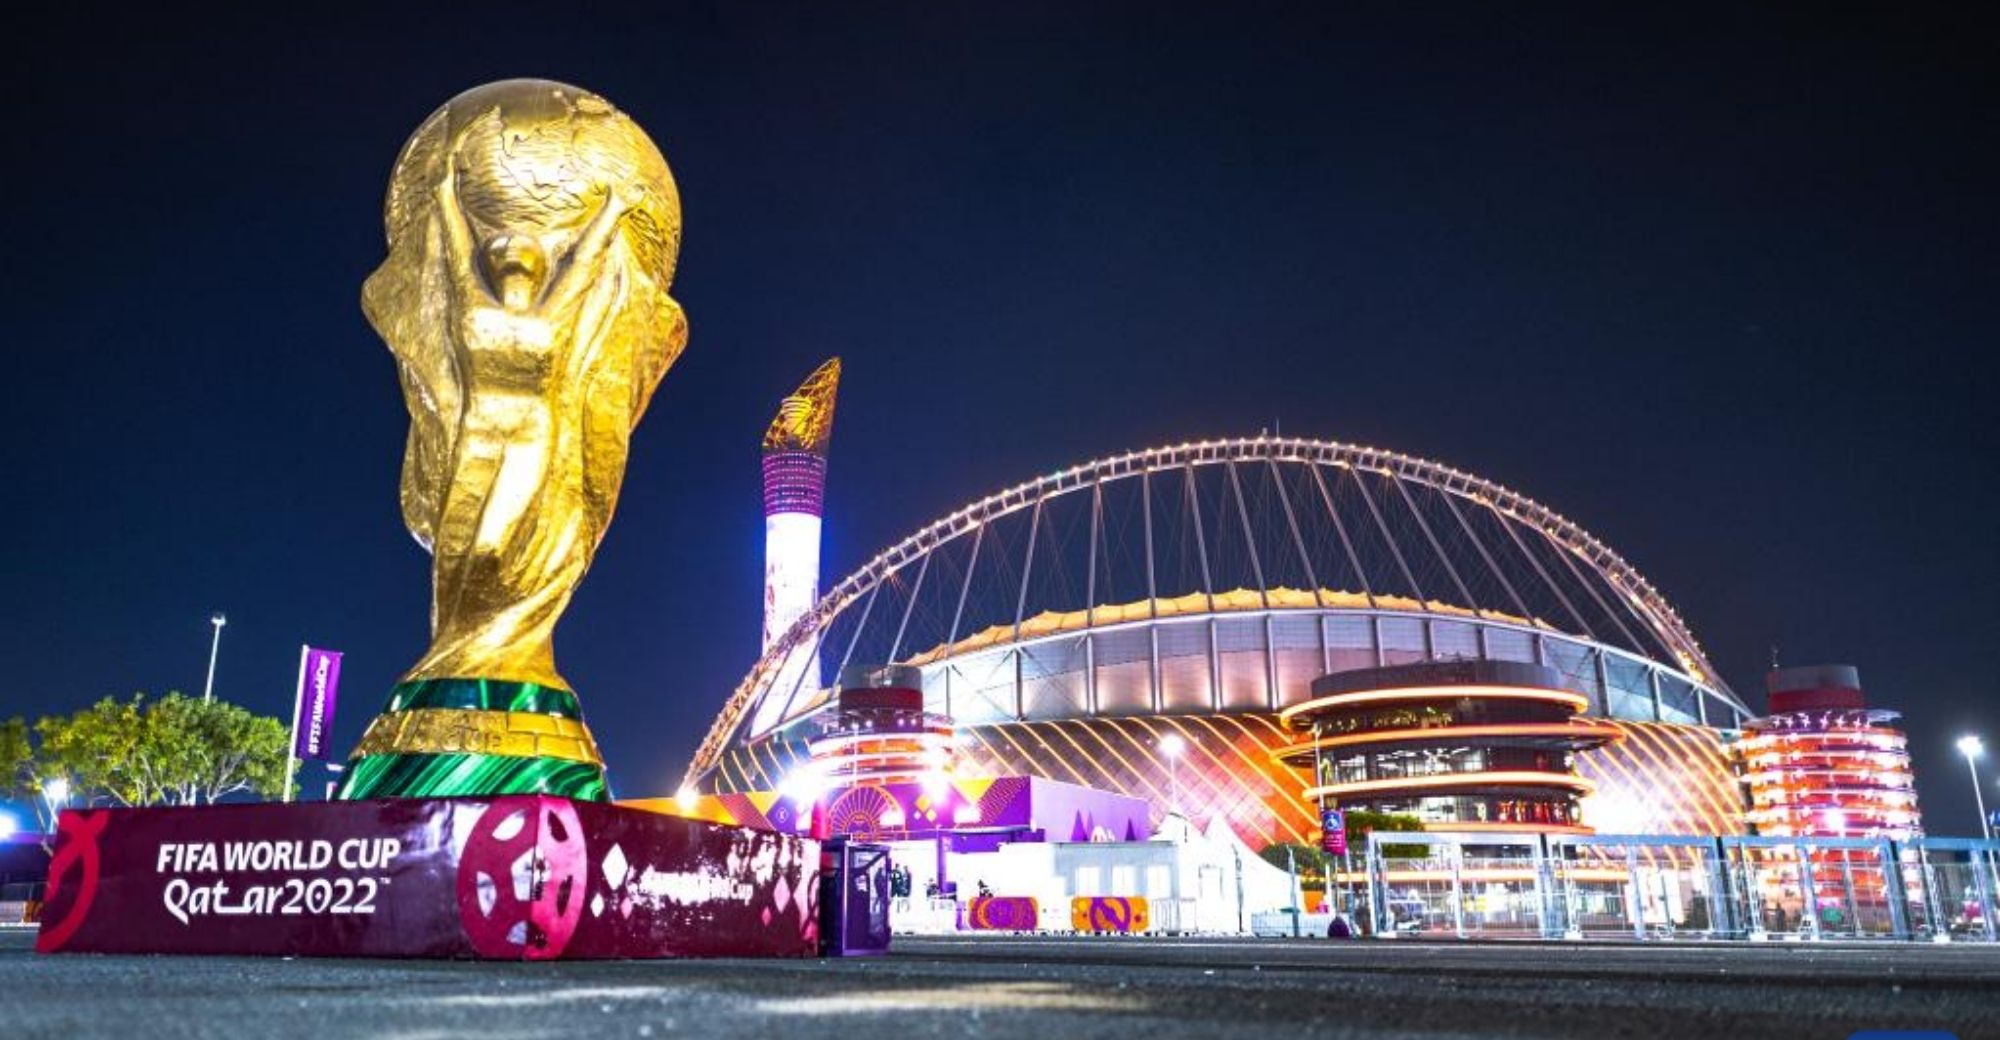 A Review of Chinese Brands Involved with the FIFA World Cup Qatar 2022